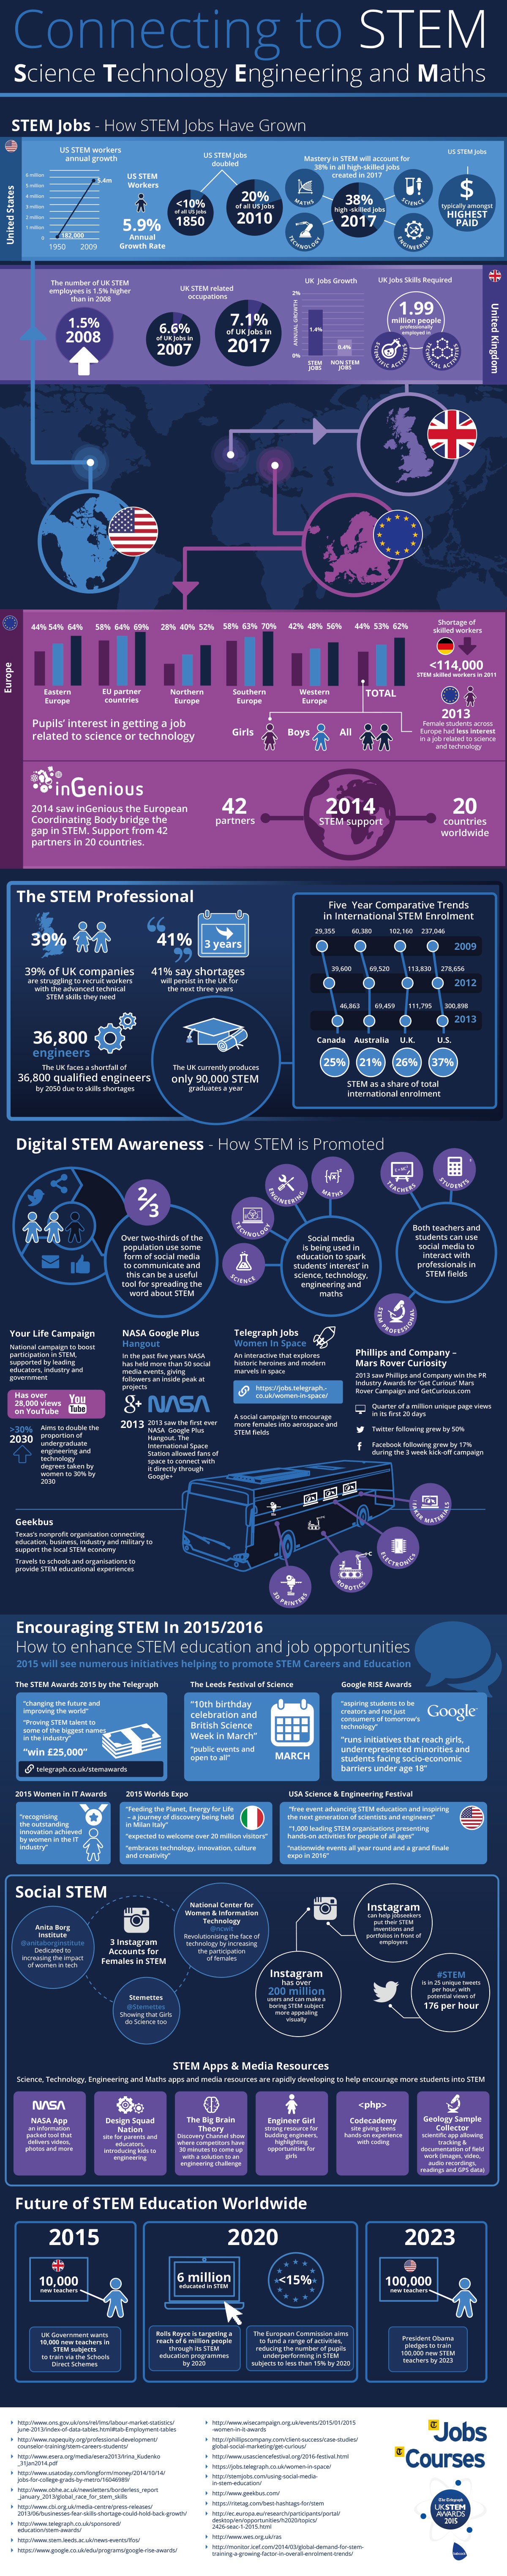 Connecting to STEM Infographic High Res.docx